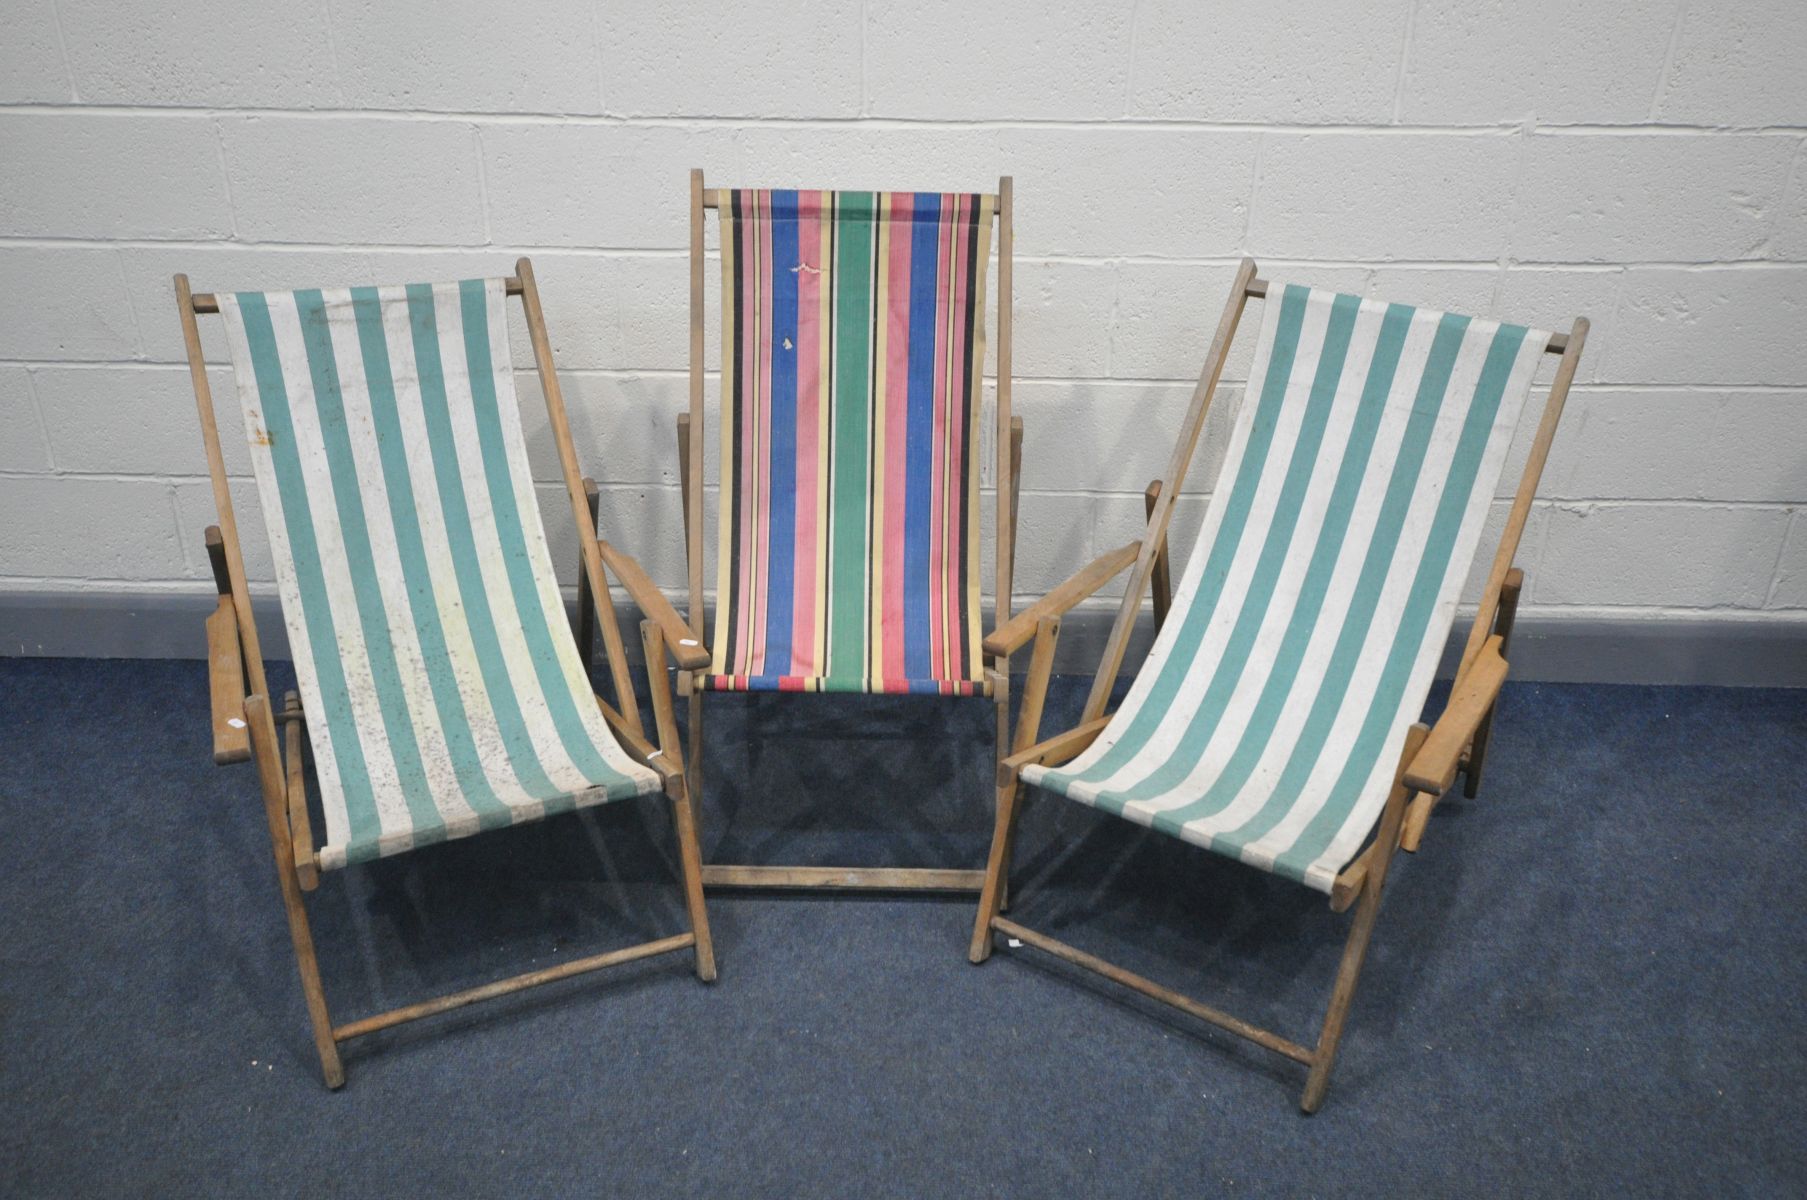 TWO VINTAGE FOLDING DECK CHAIRS with armrests, and green stripped fabric, and another folding deck